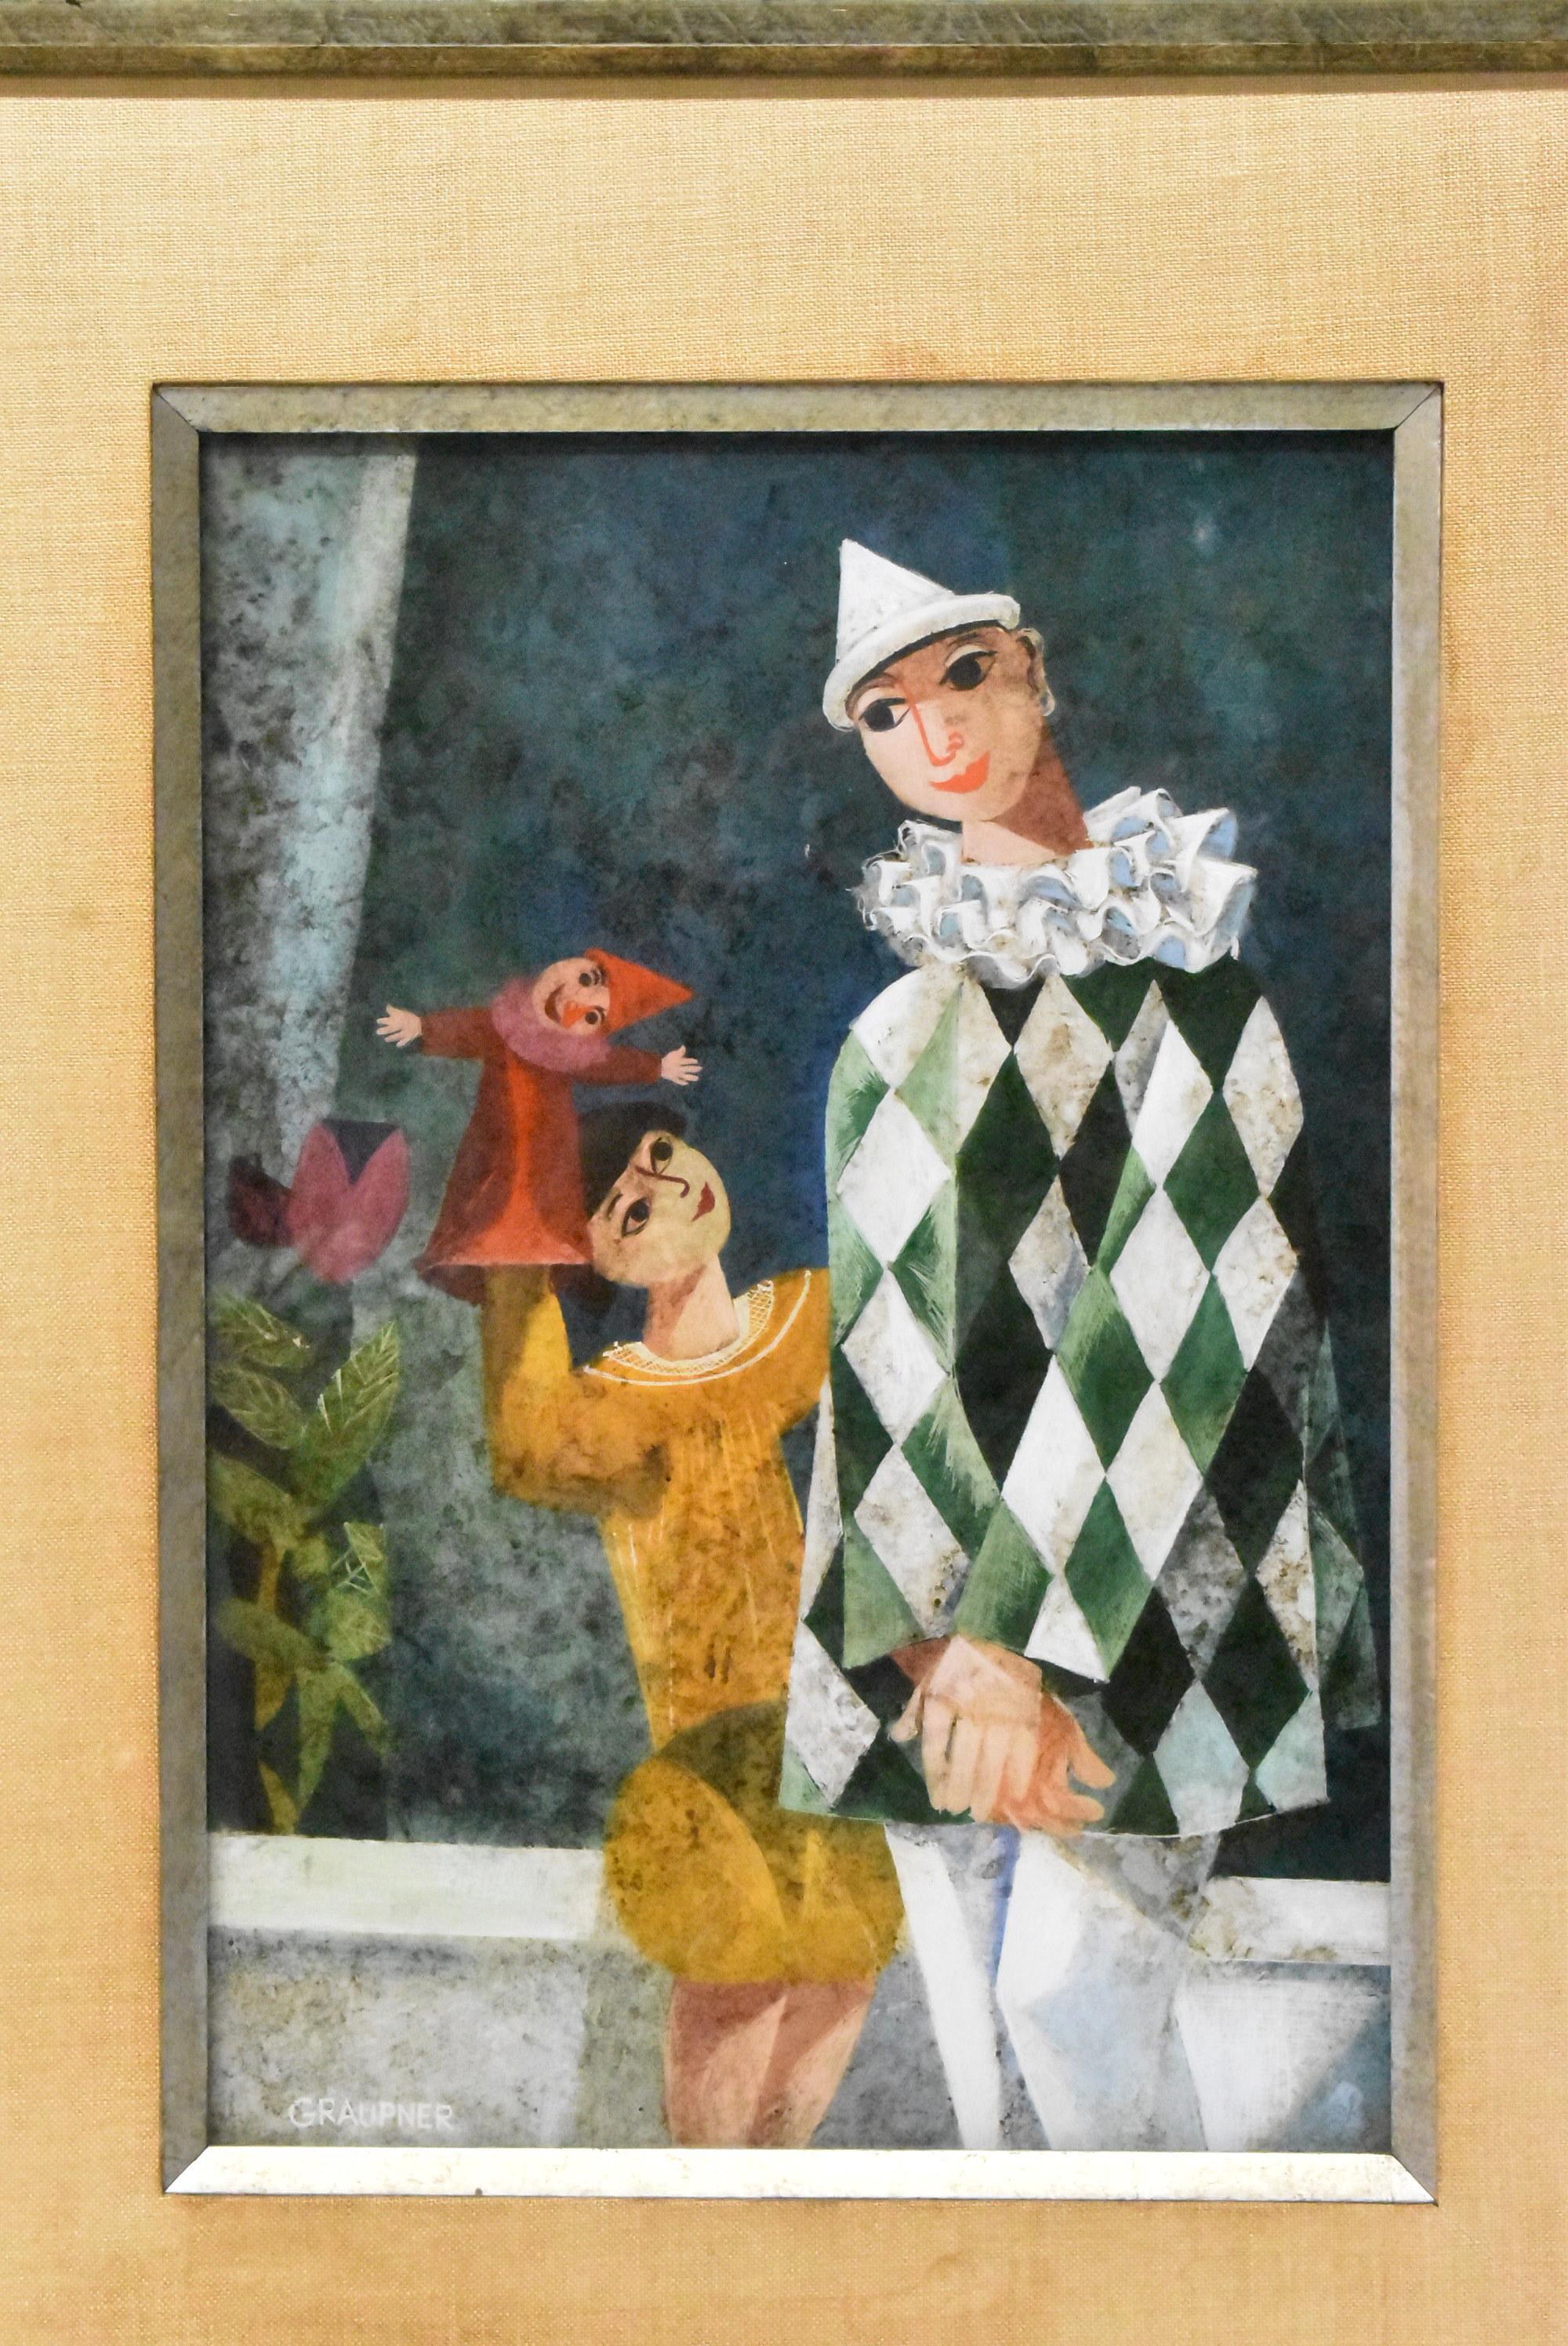 Original reverse painting on glass by German artist Ernest Graupner 1917-1989. Child with puppet and jester, harlequin. Signed.